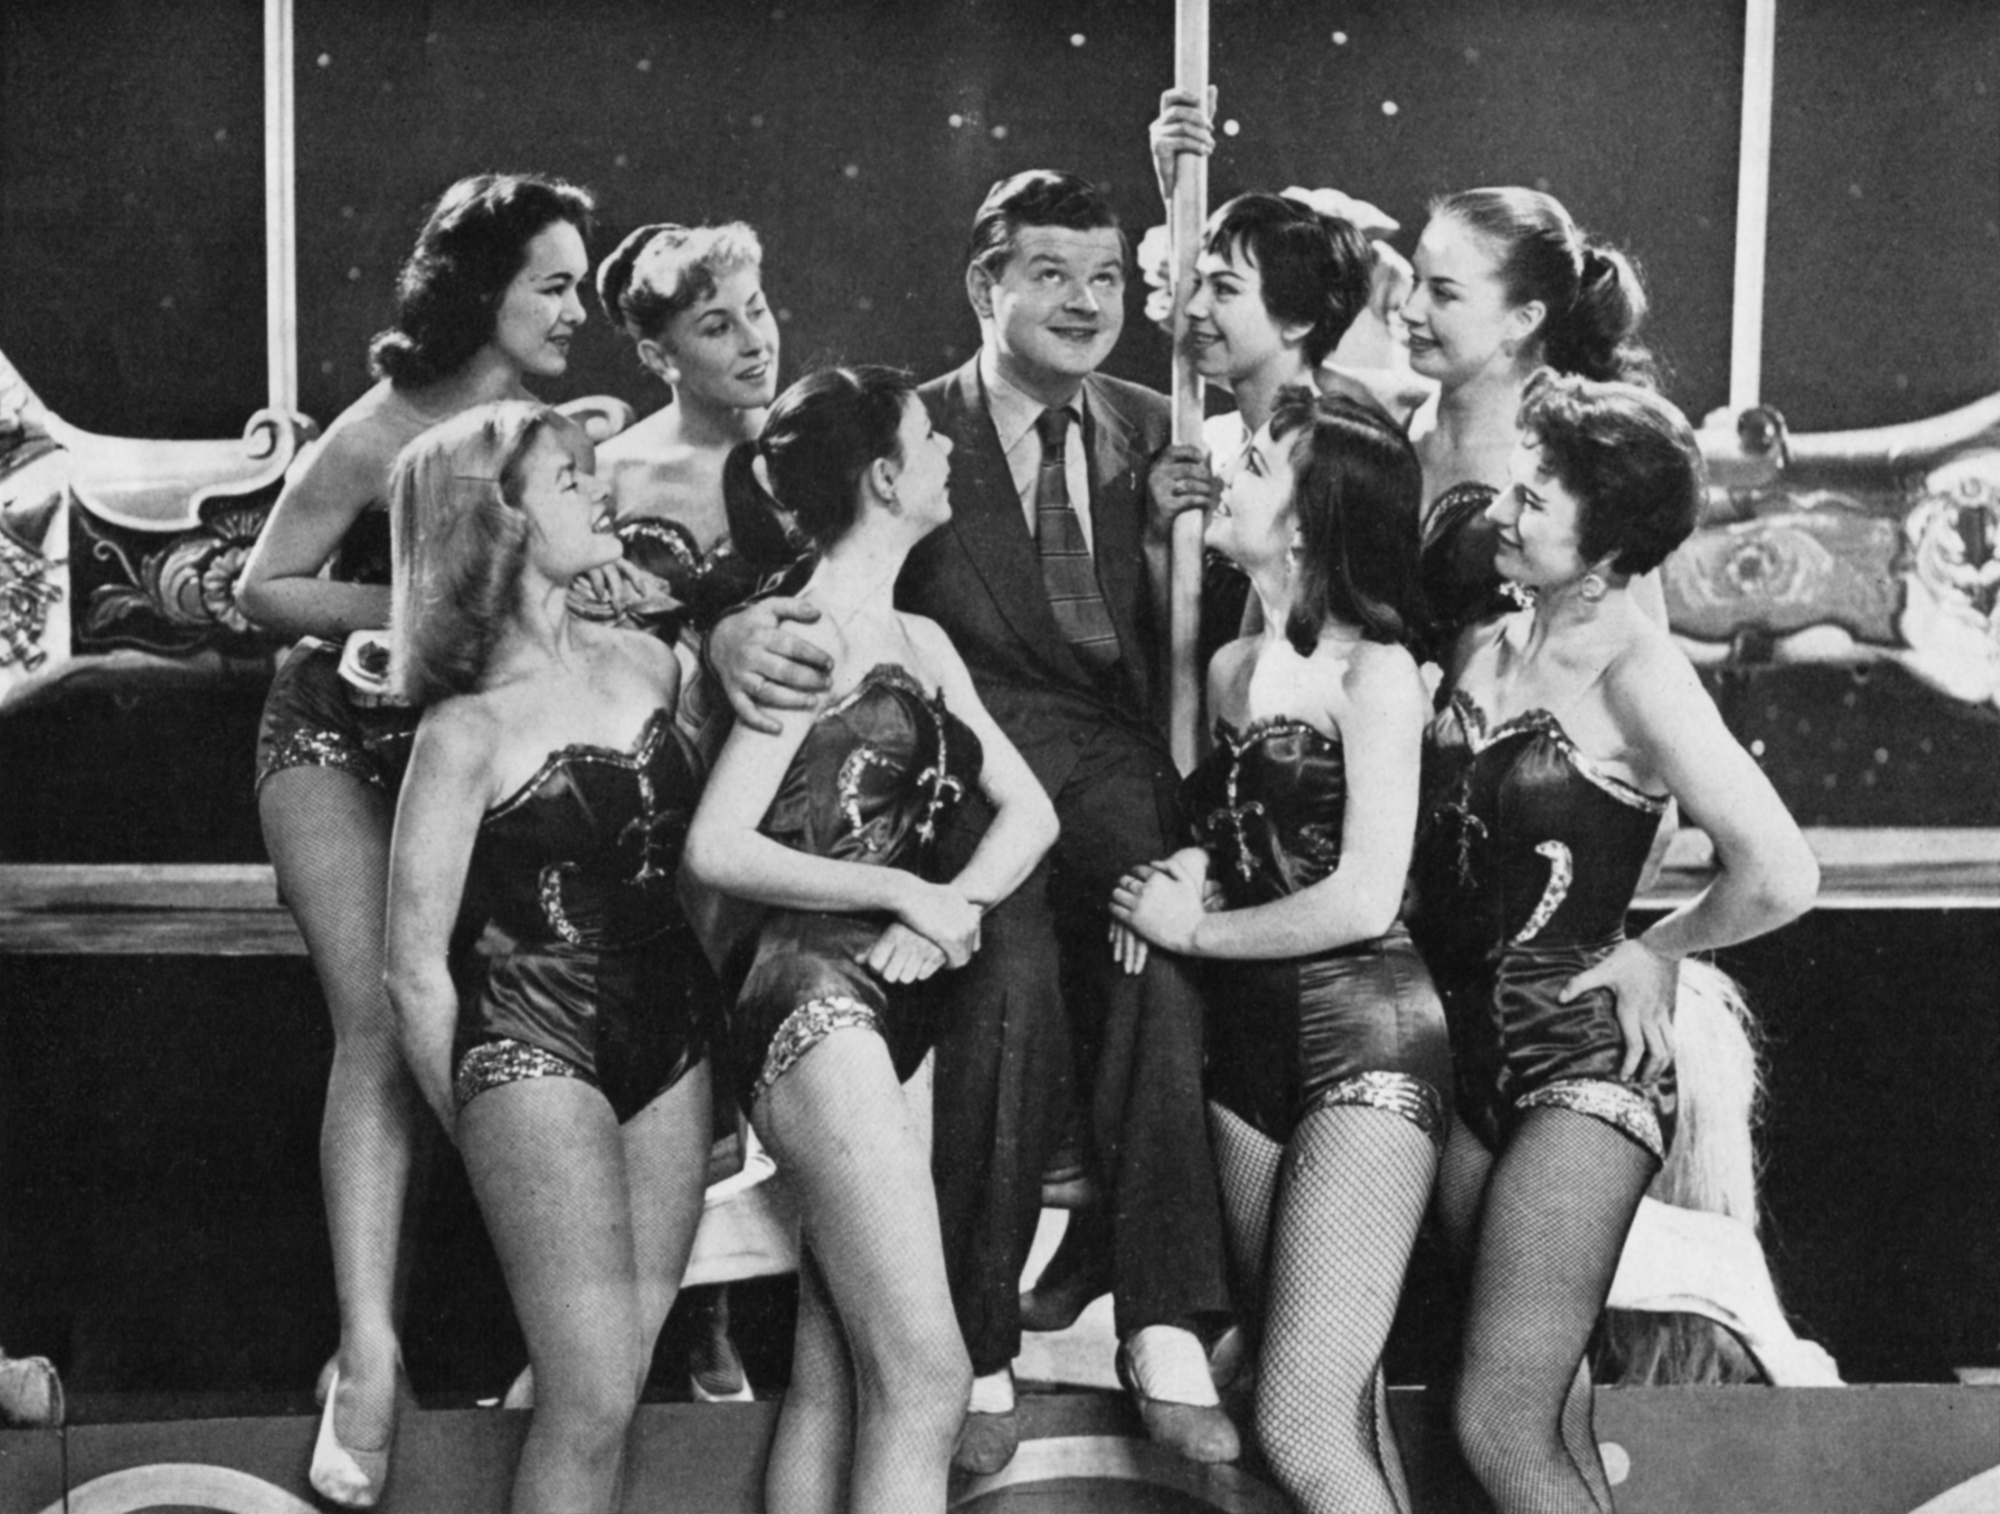 Benny Hill sits on the edge of a carousel whilse surrounded by 8 girls in skimpy costumes